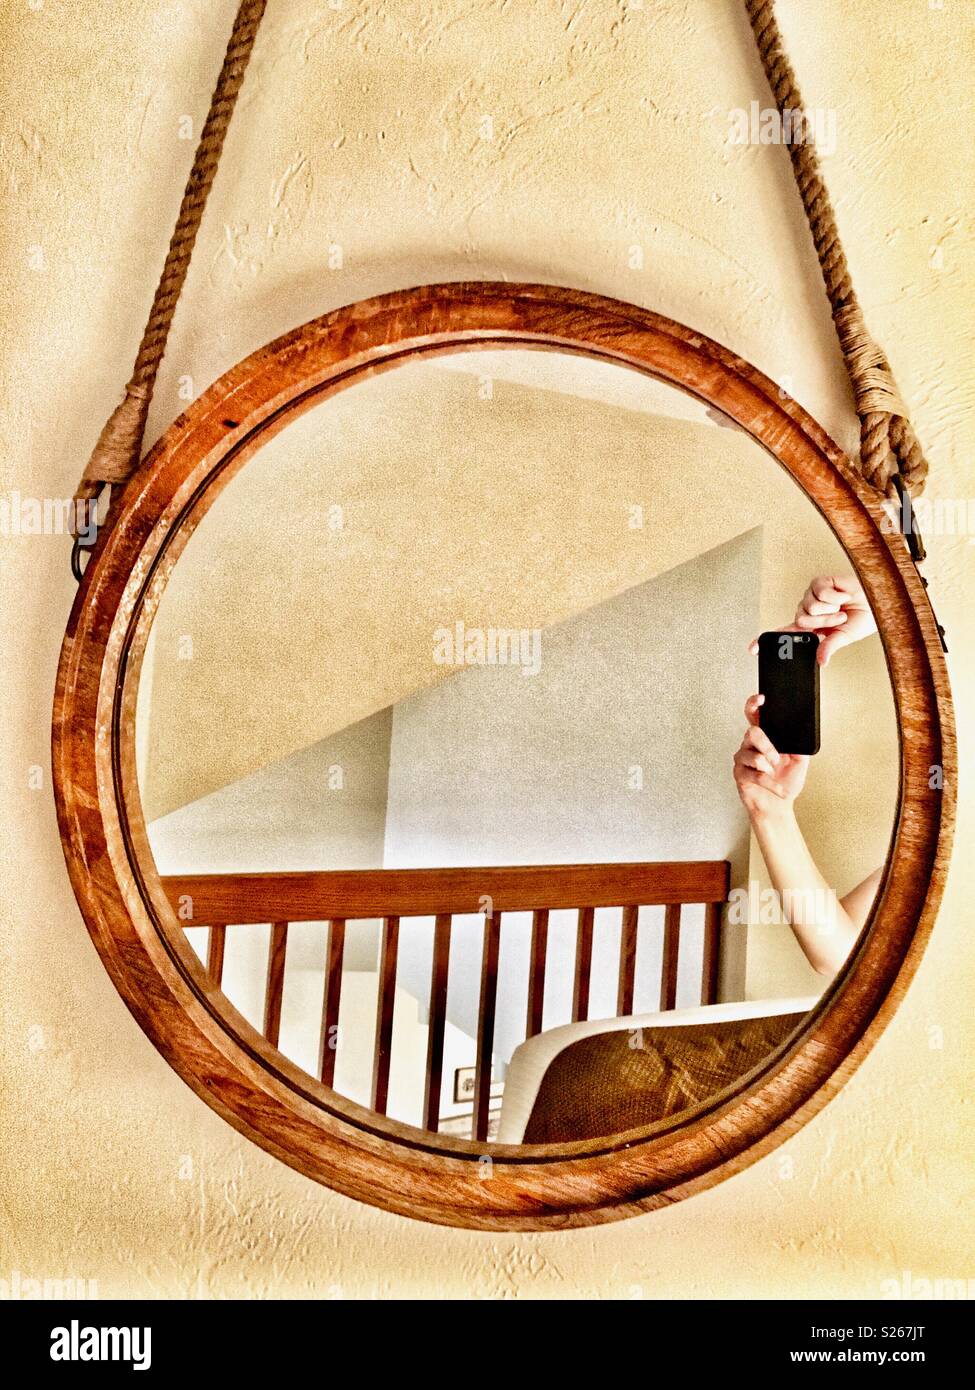 Person taking selfie of hands in a round mirror by a balcony Stock Photo